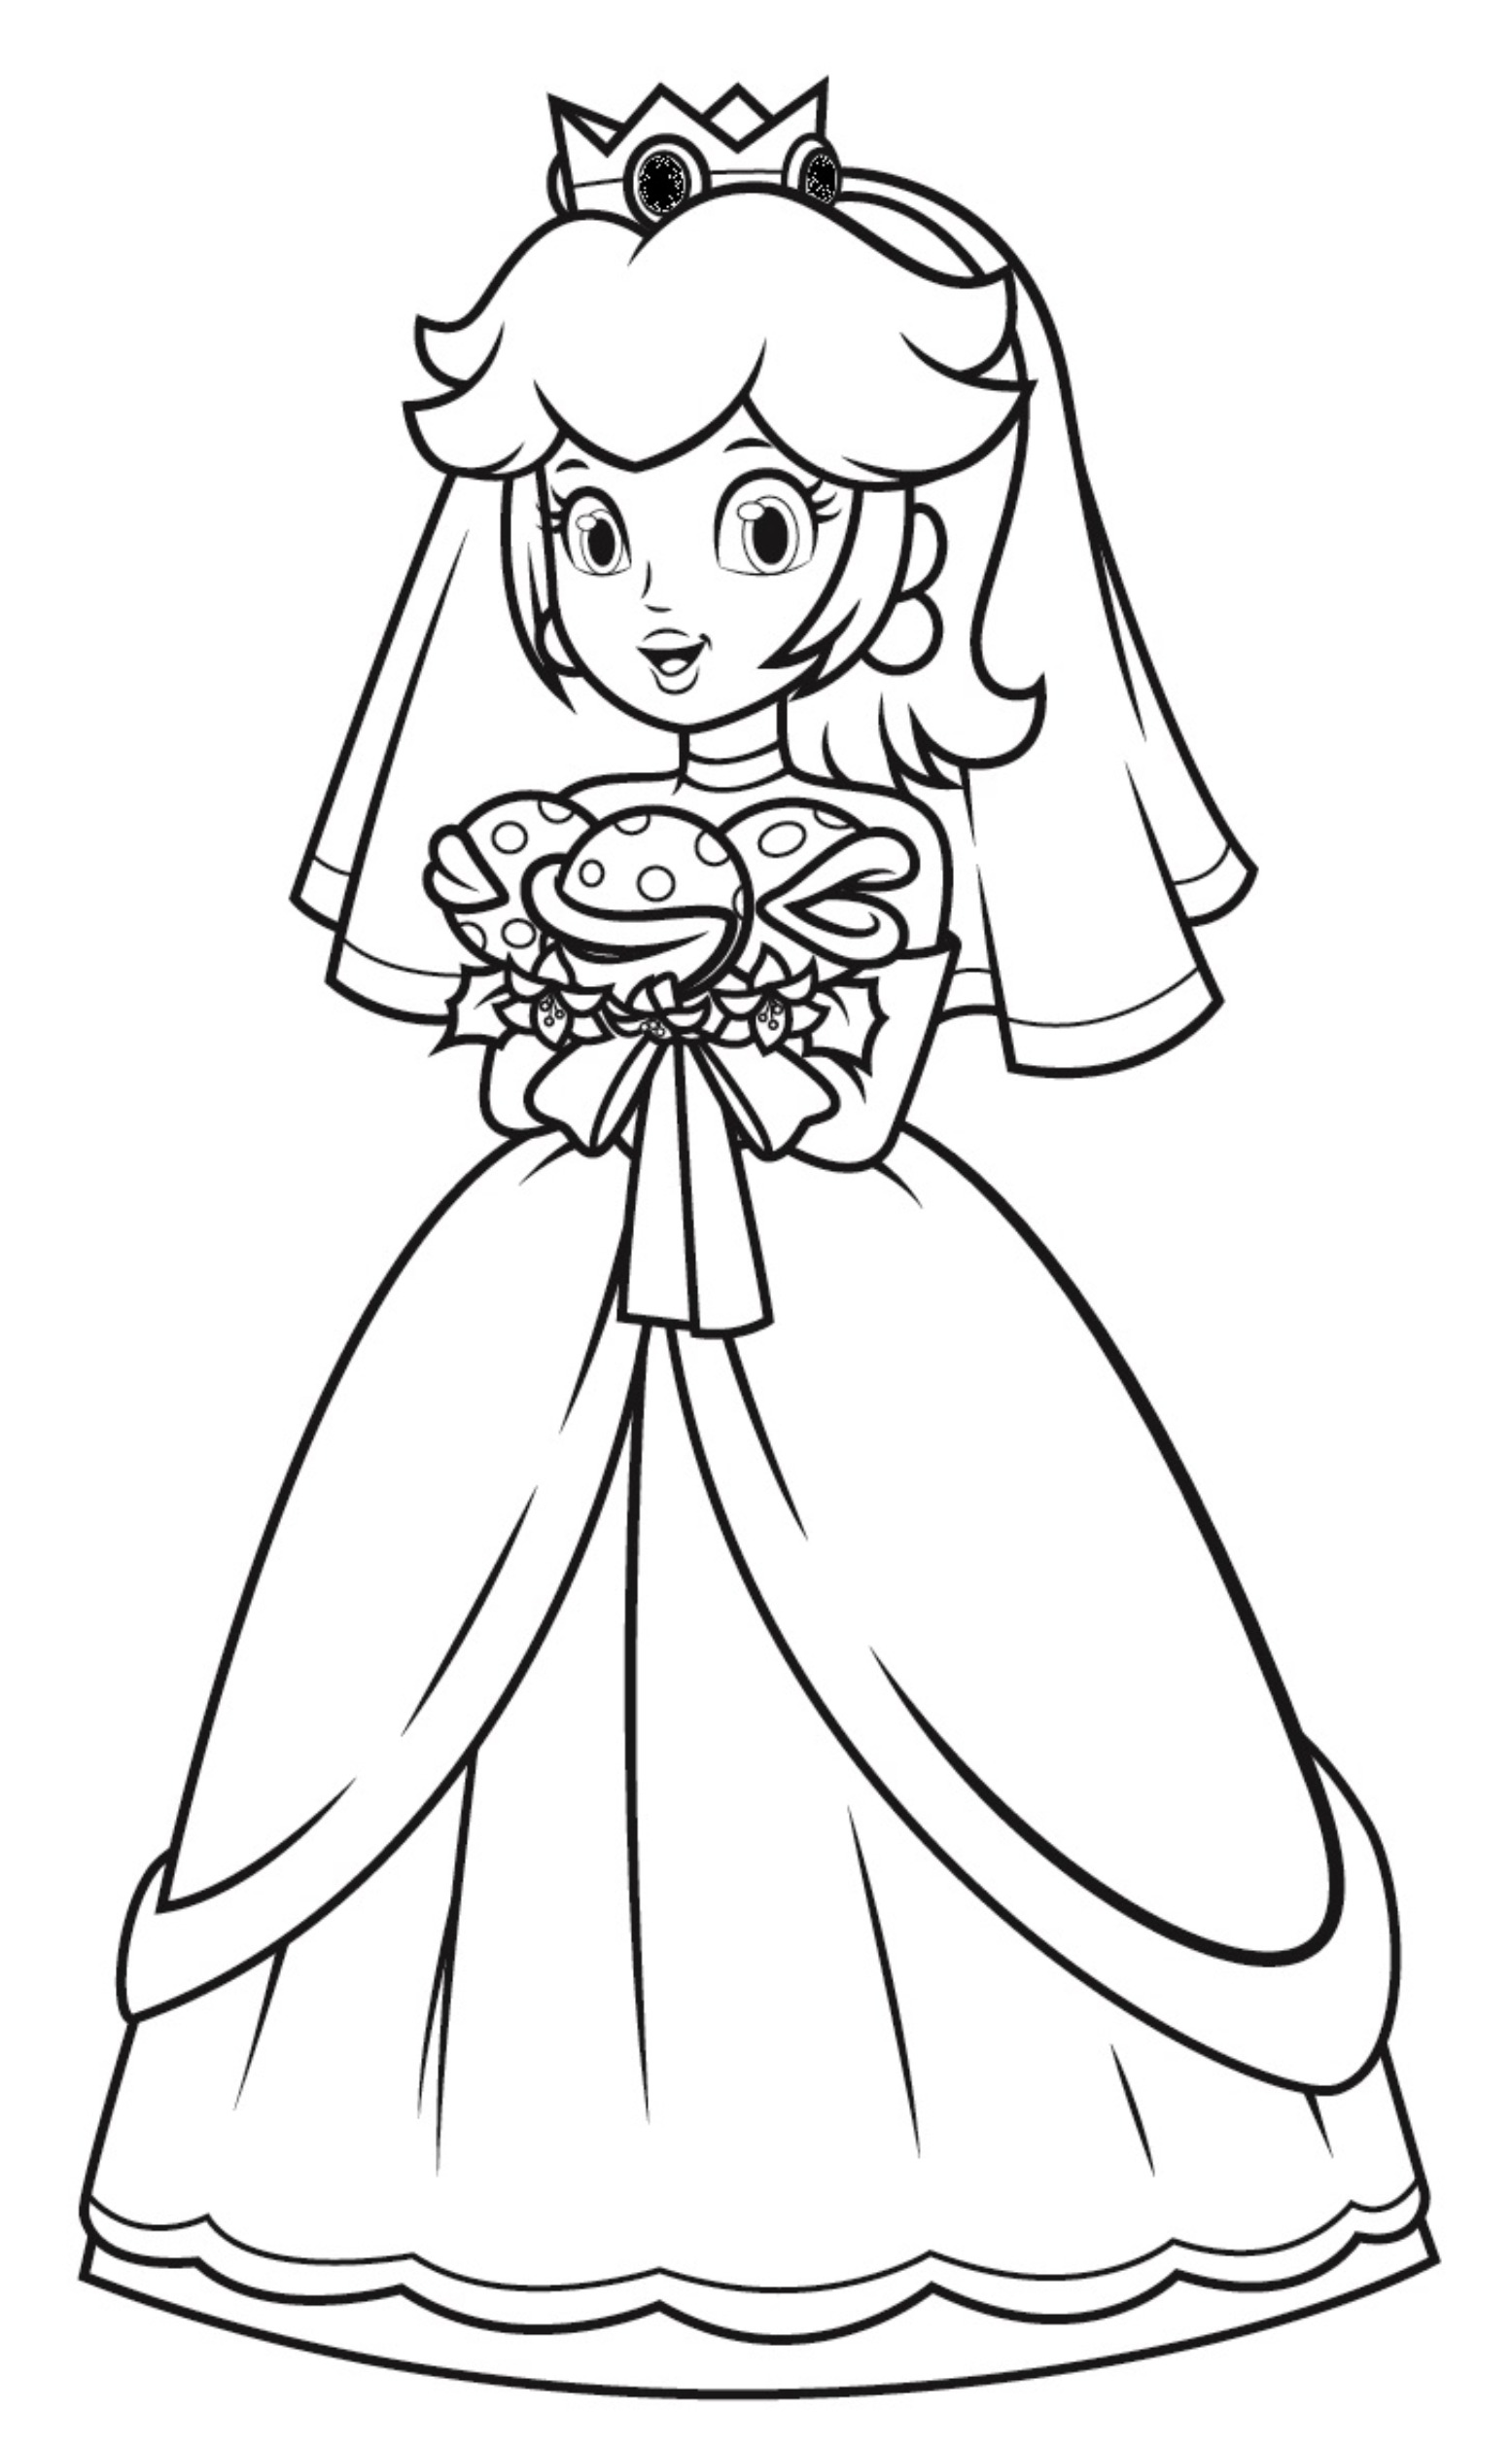 princess-peach-toadstool-coloring-page-coloring-pages-princess-peach